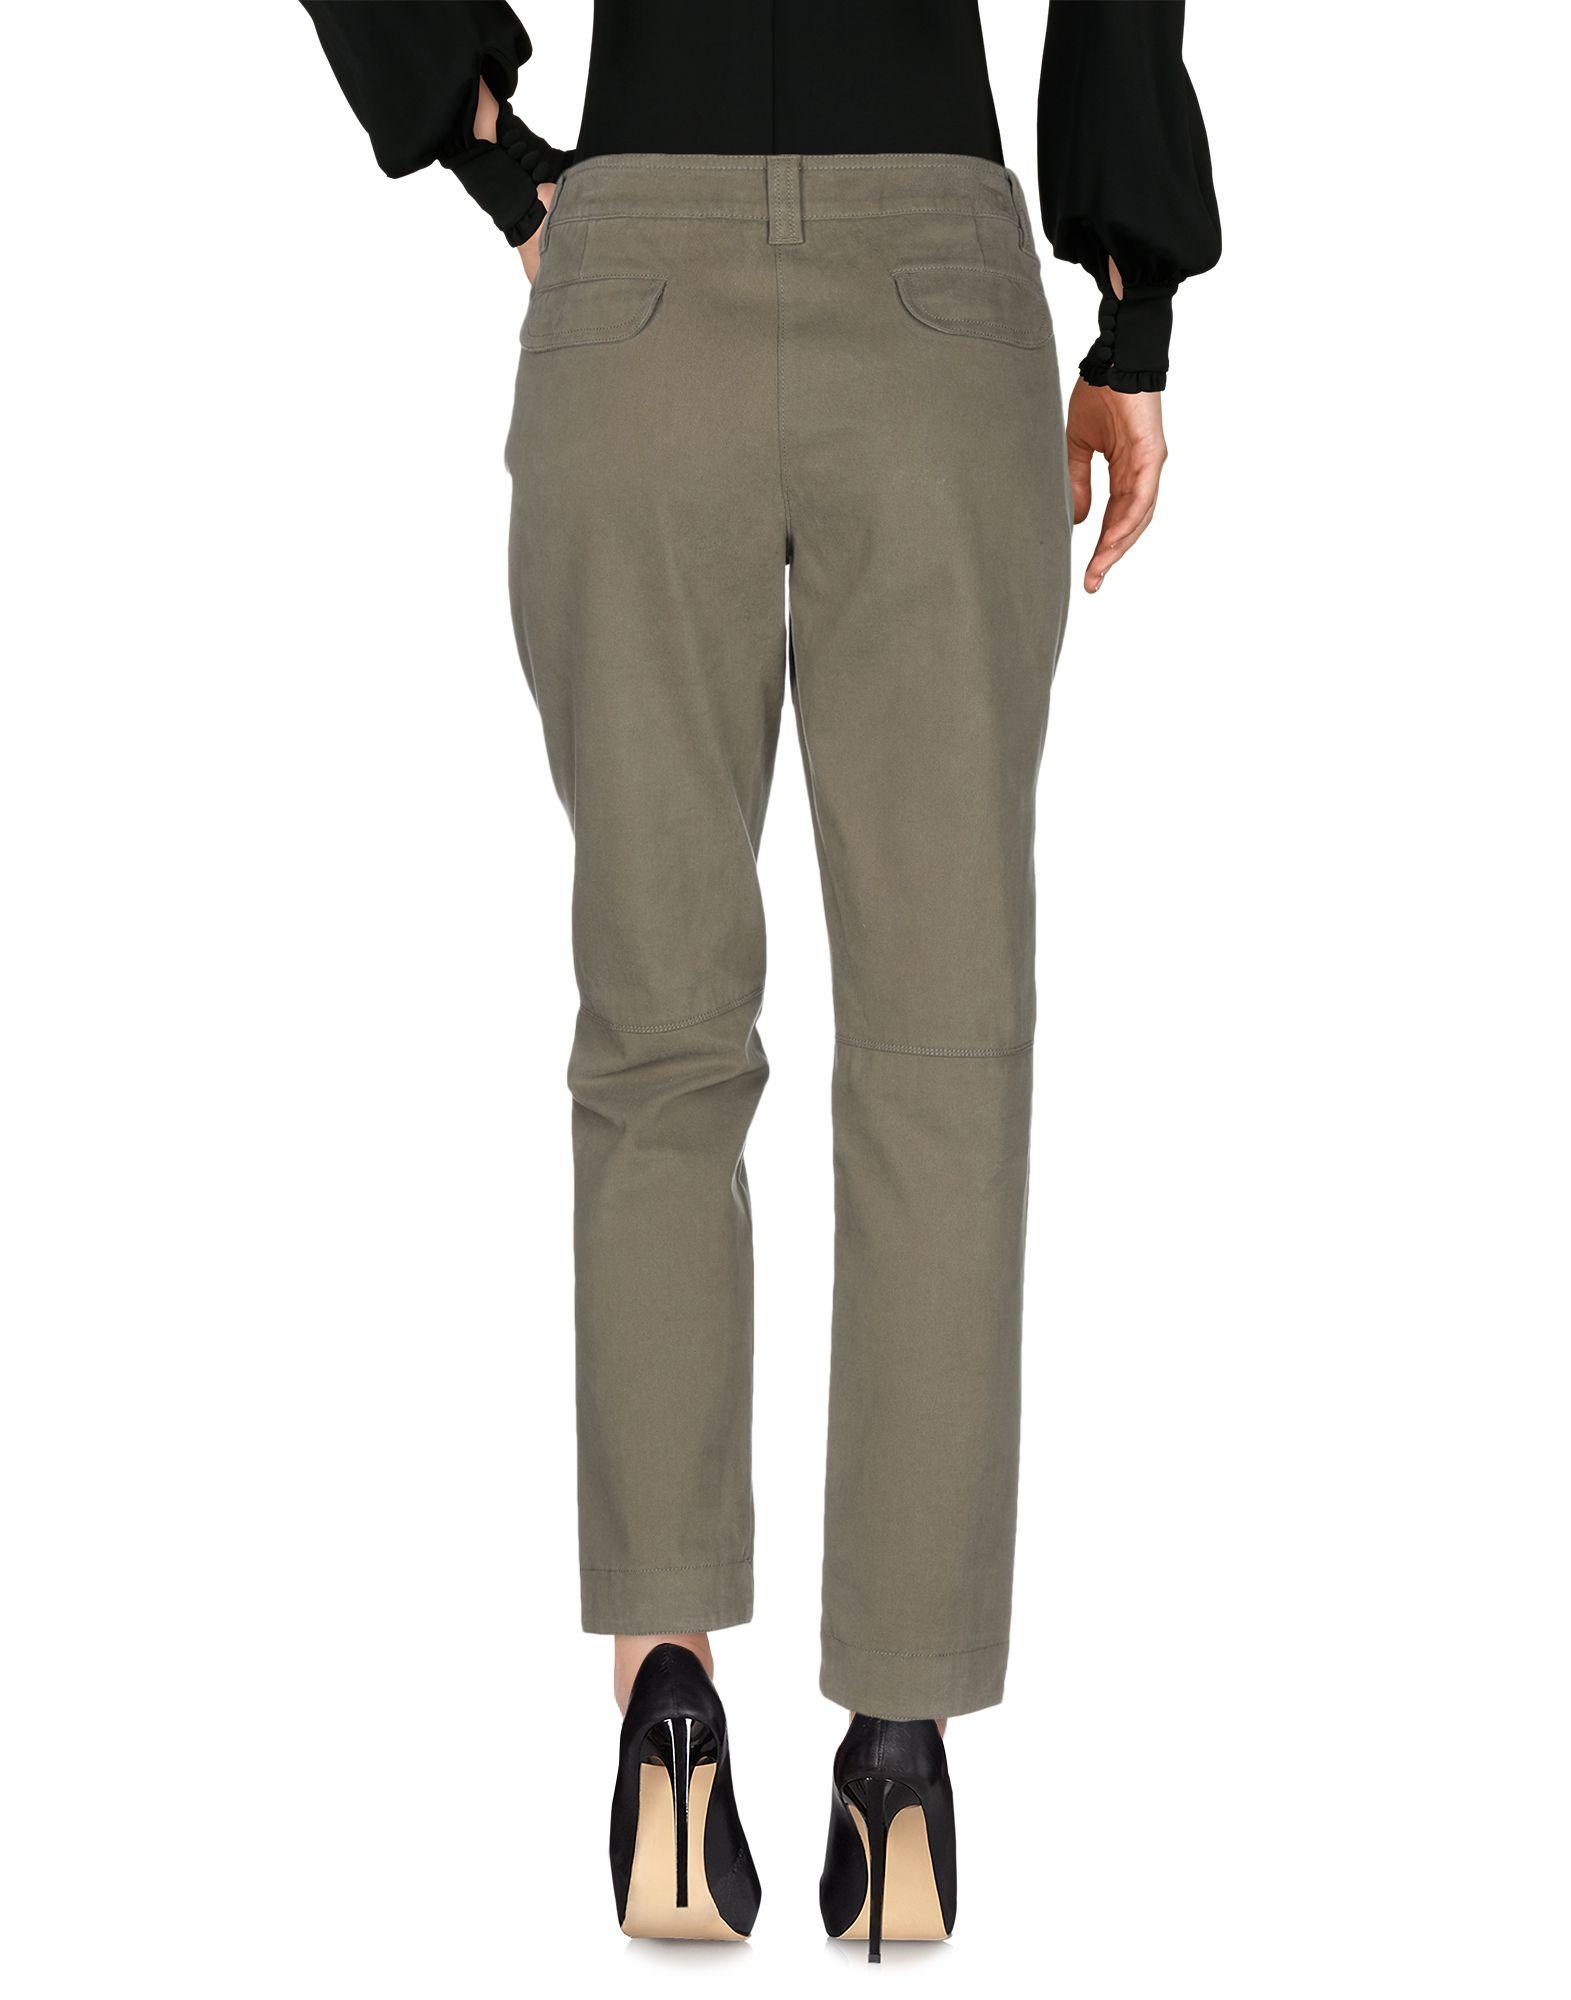 Henry Cotton's Cotton Casual Pants in Military Green (Green) - Lyst